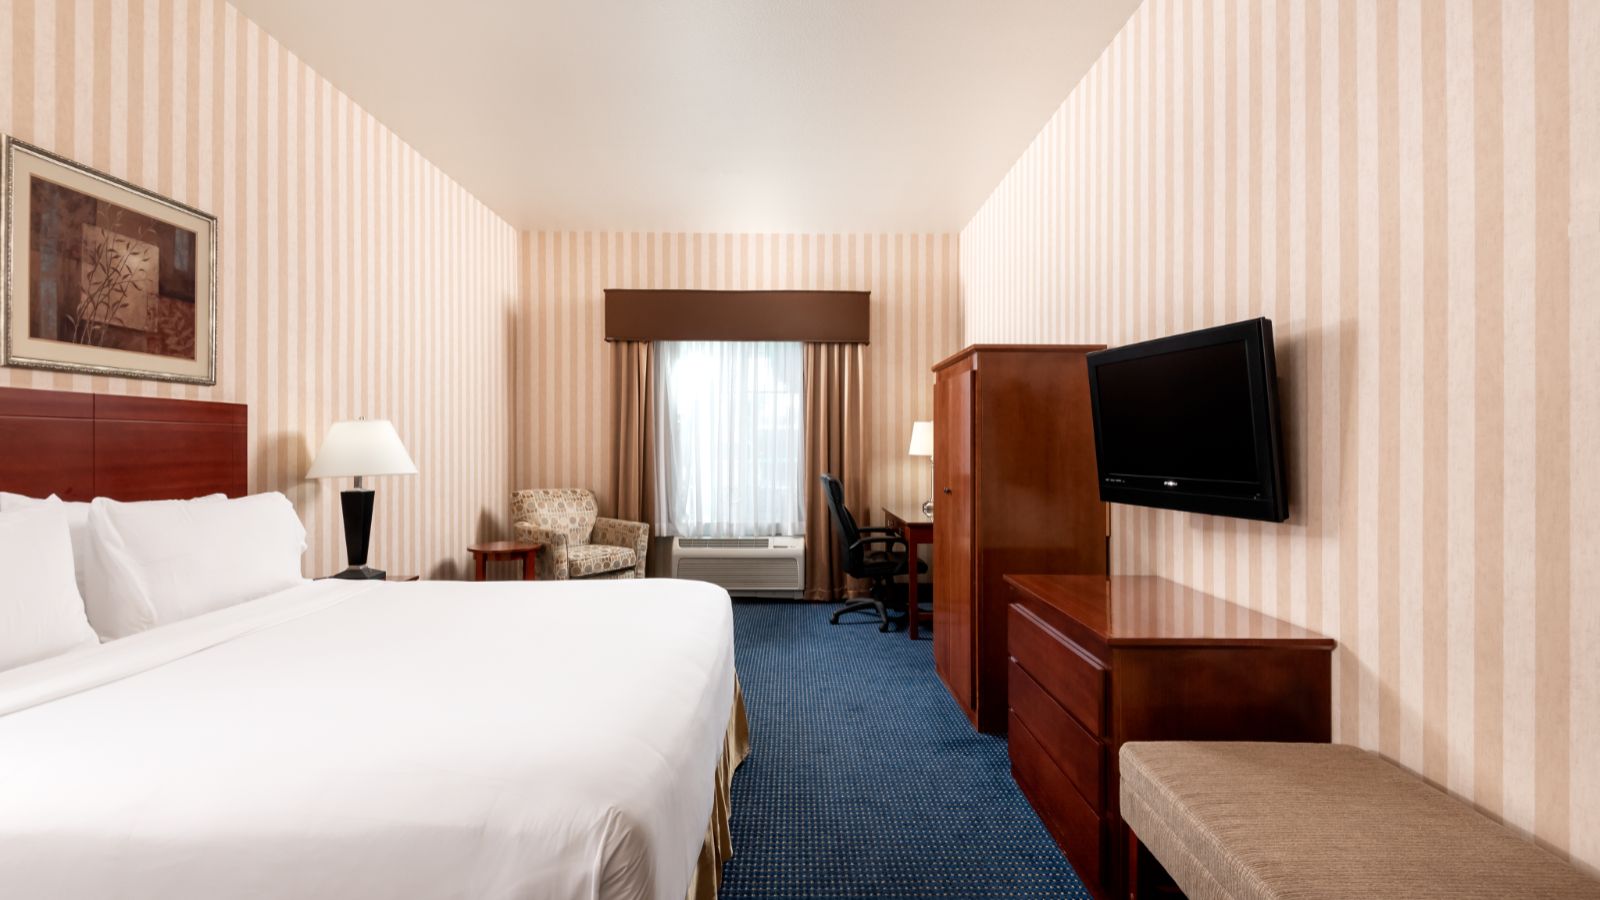 Lathrop Holiday Inn Express rooms and suites